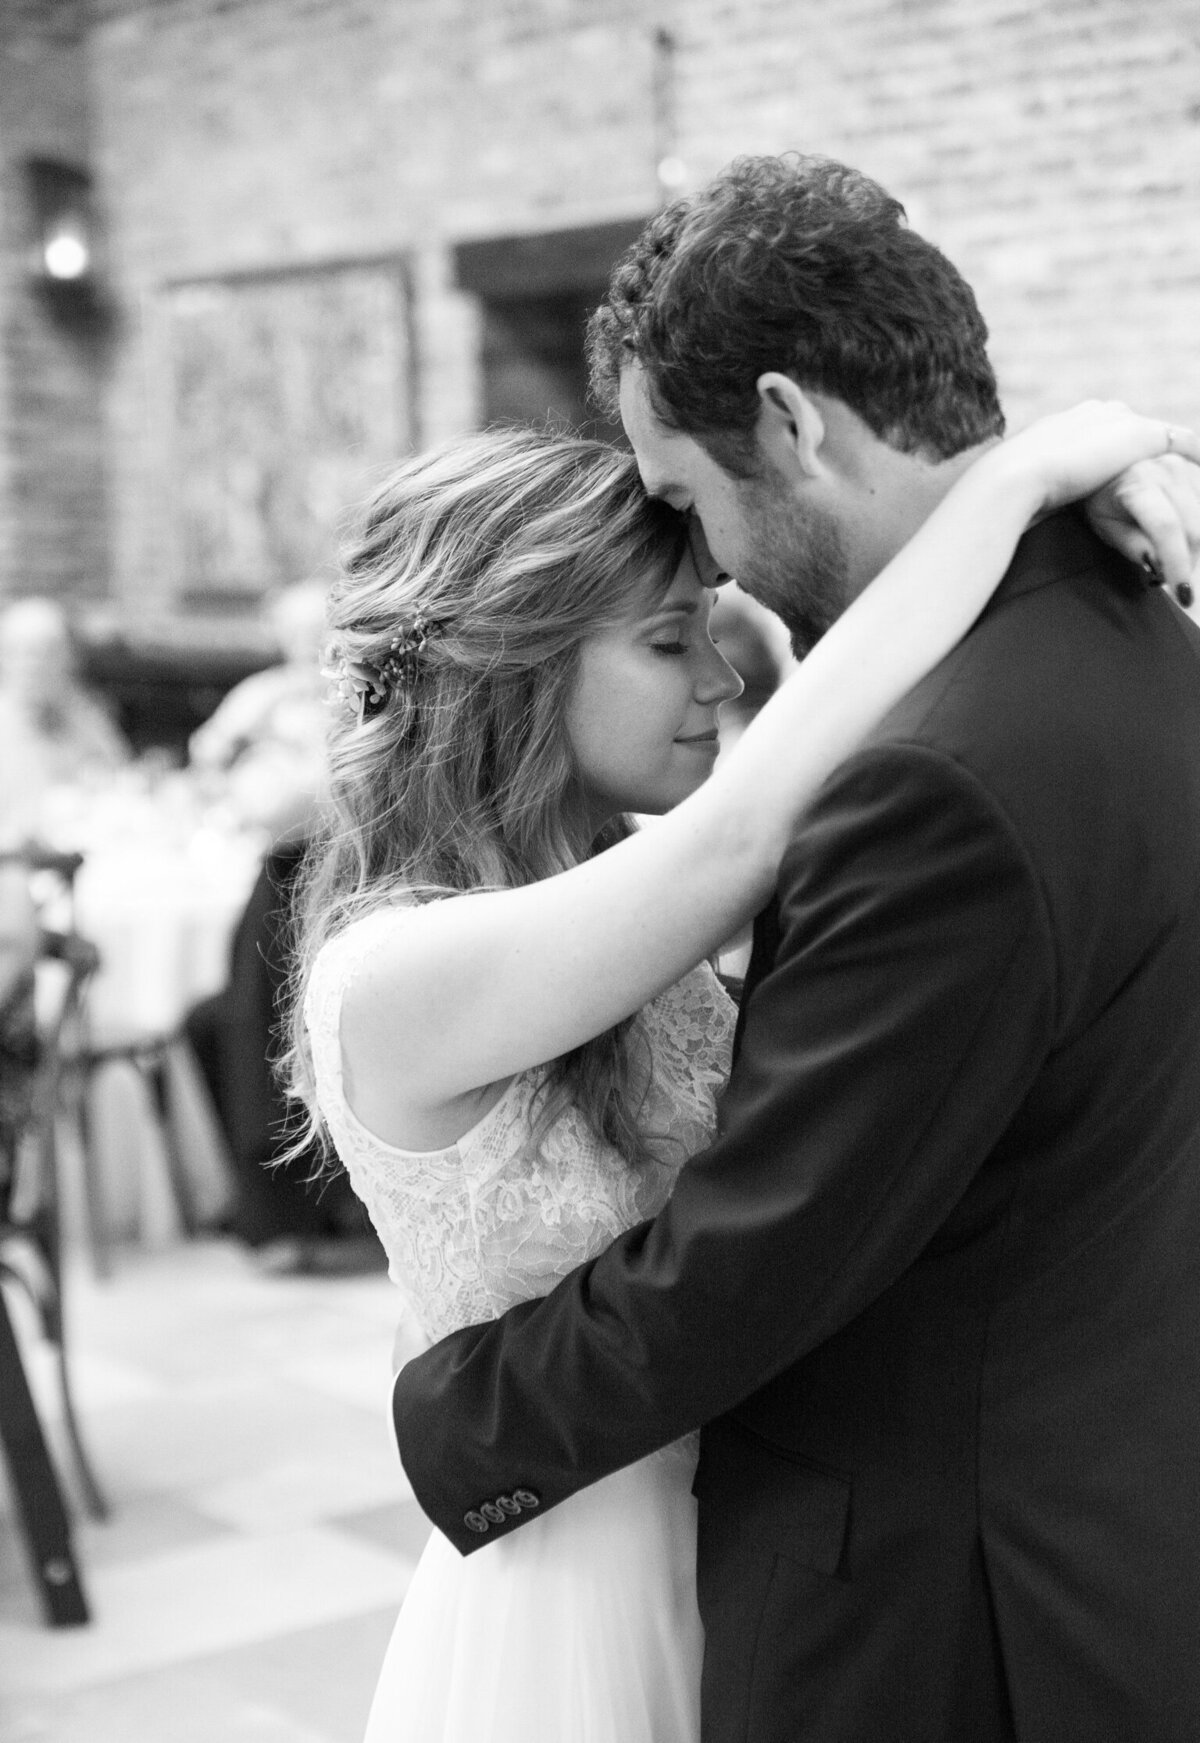 Bride and groom dance intimately